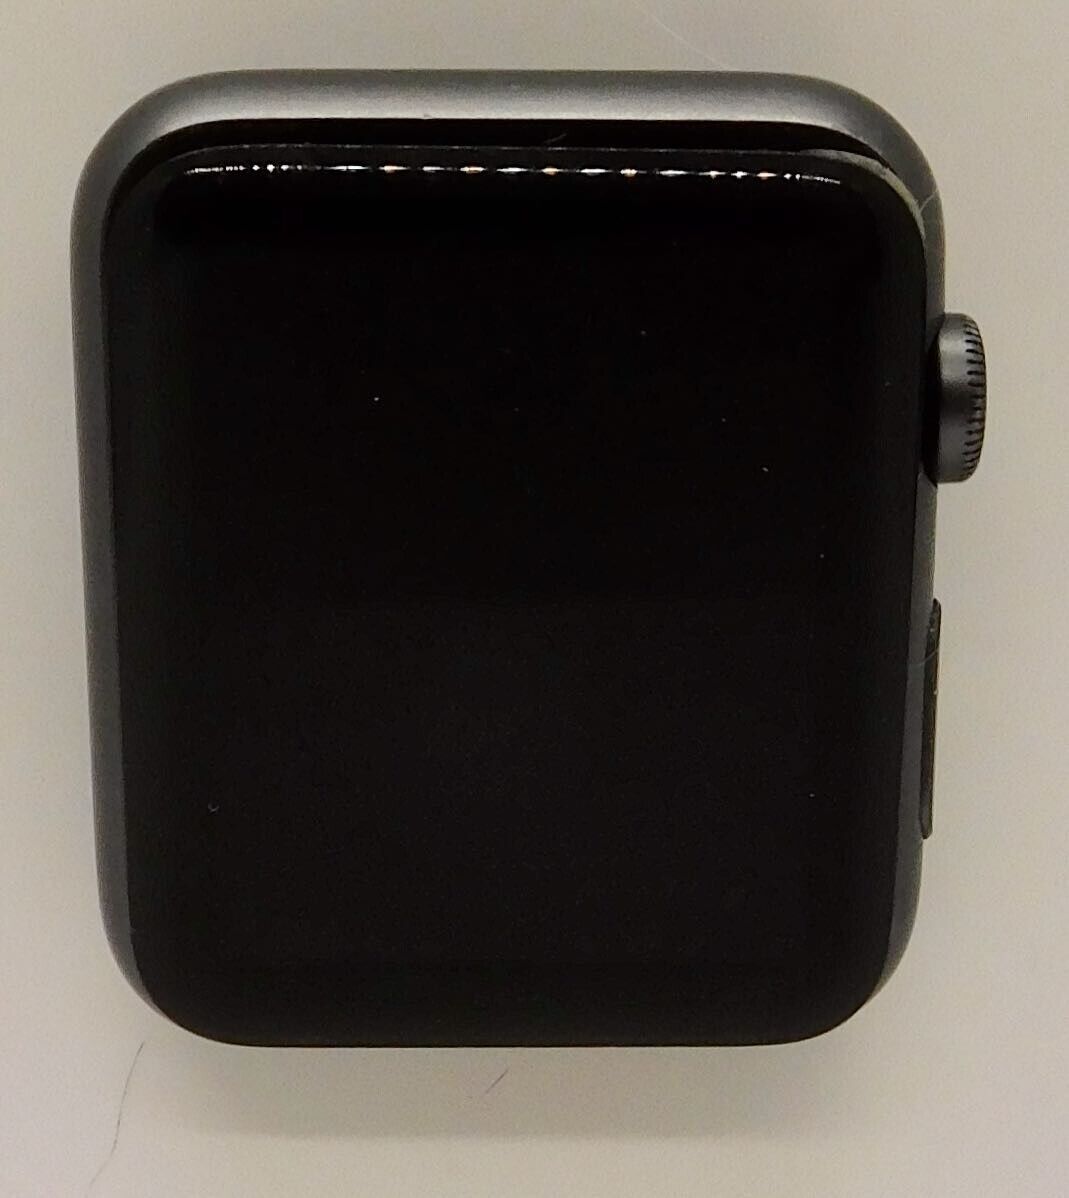 Apple Watch: Apple Watch Series 7000 1st Generation Space Gray - Parts or Repair